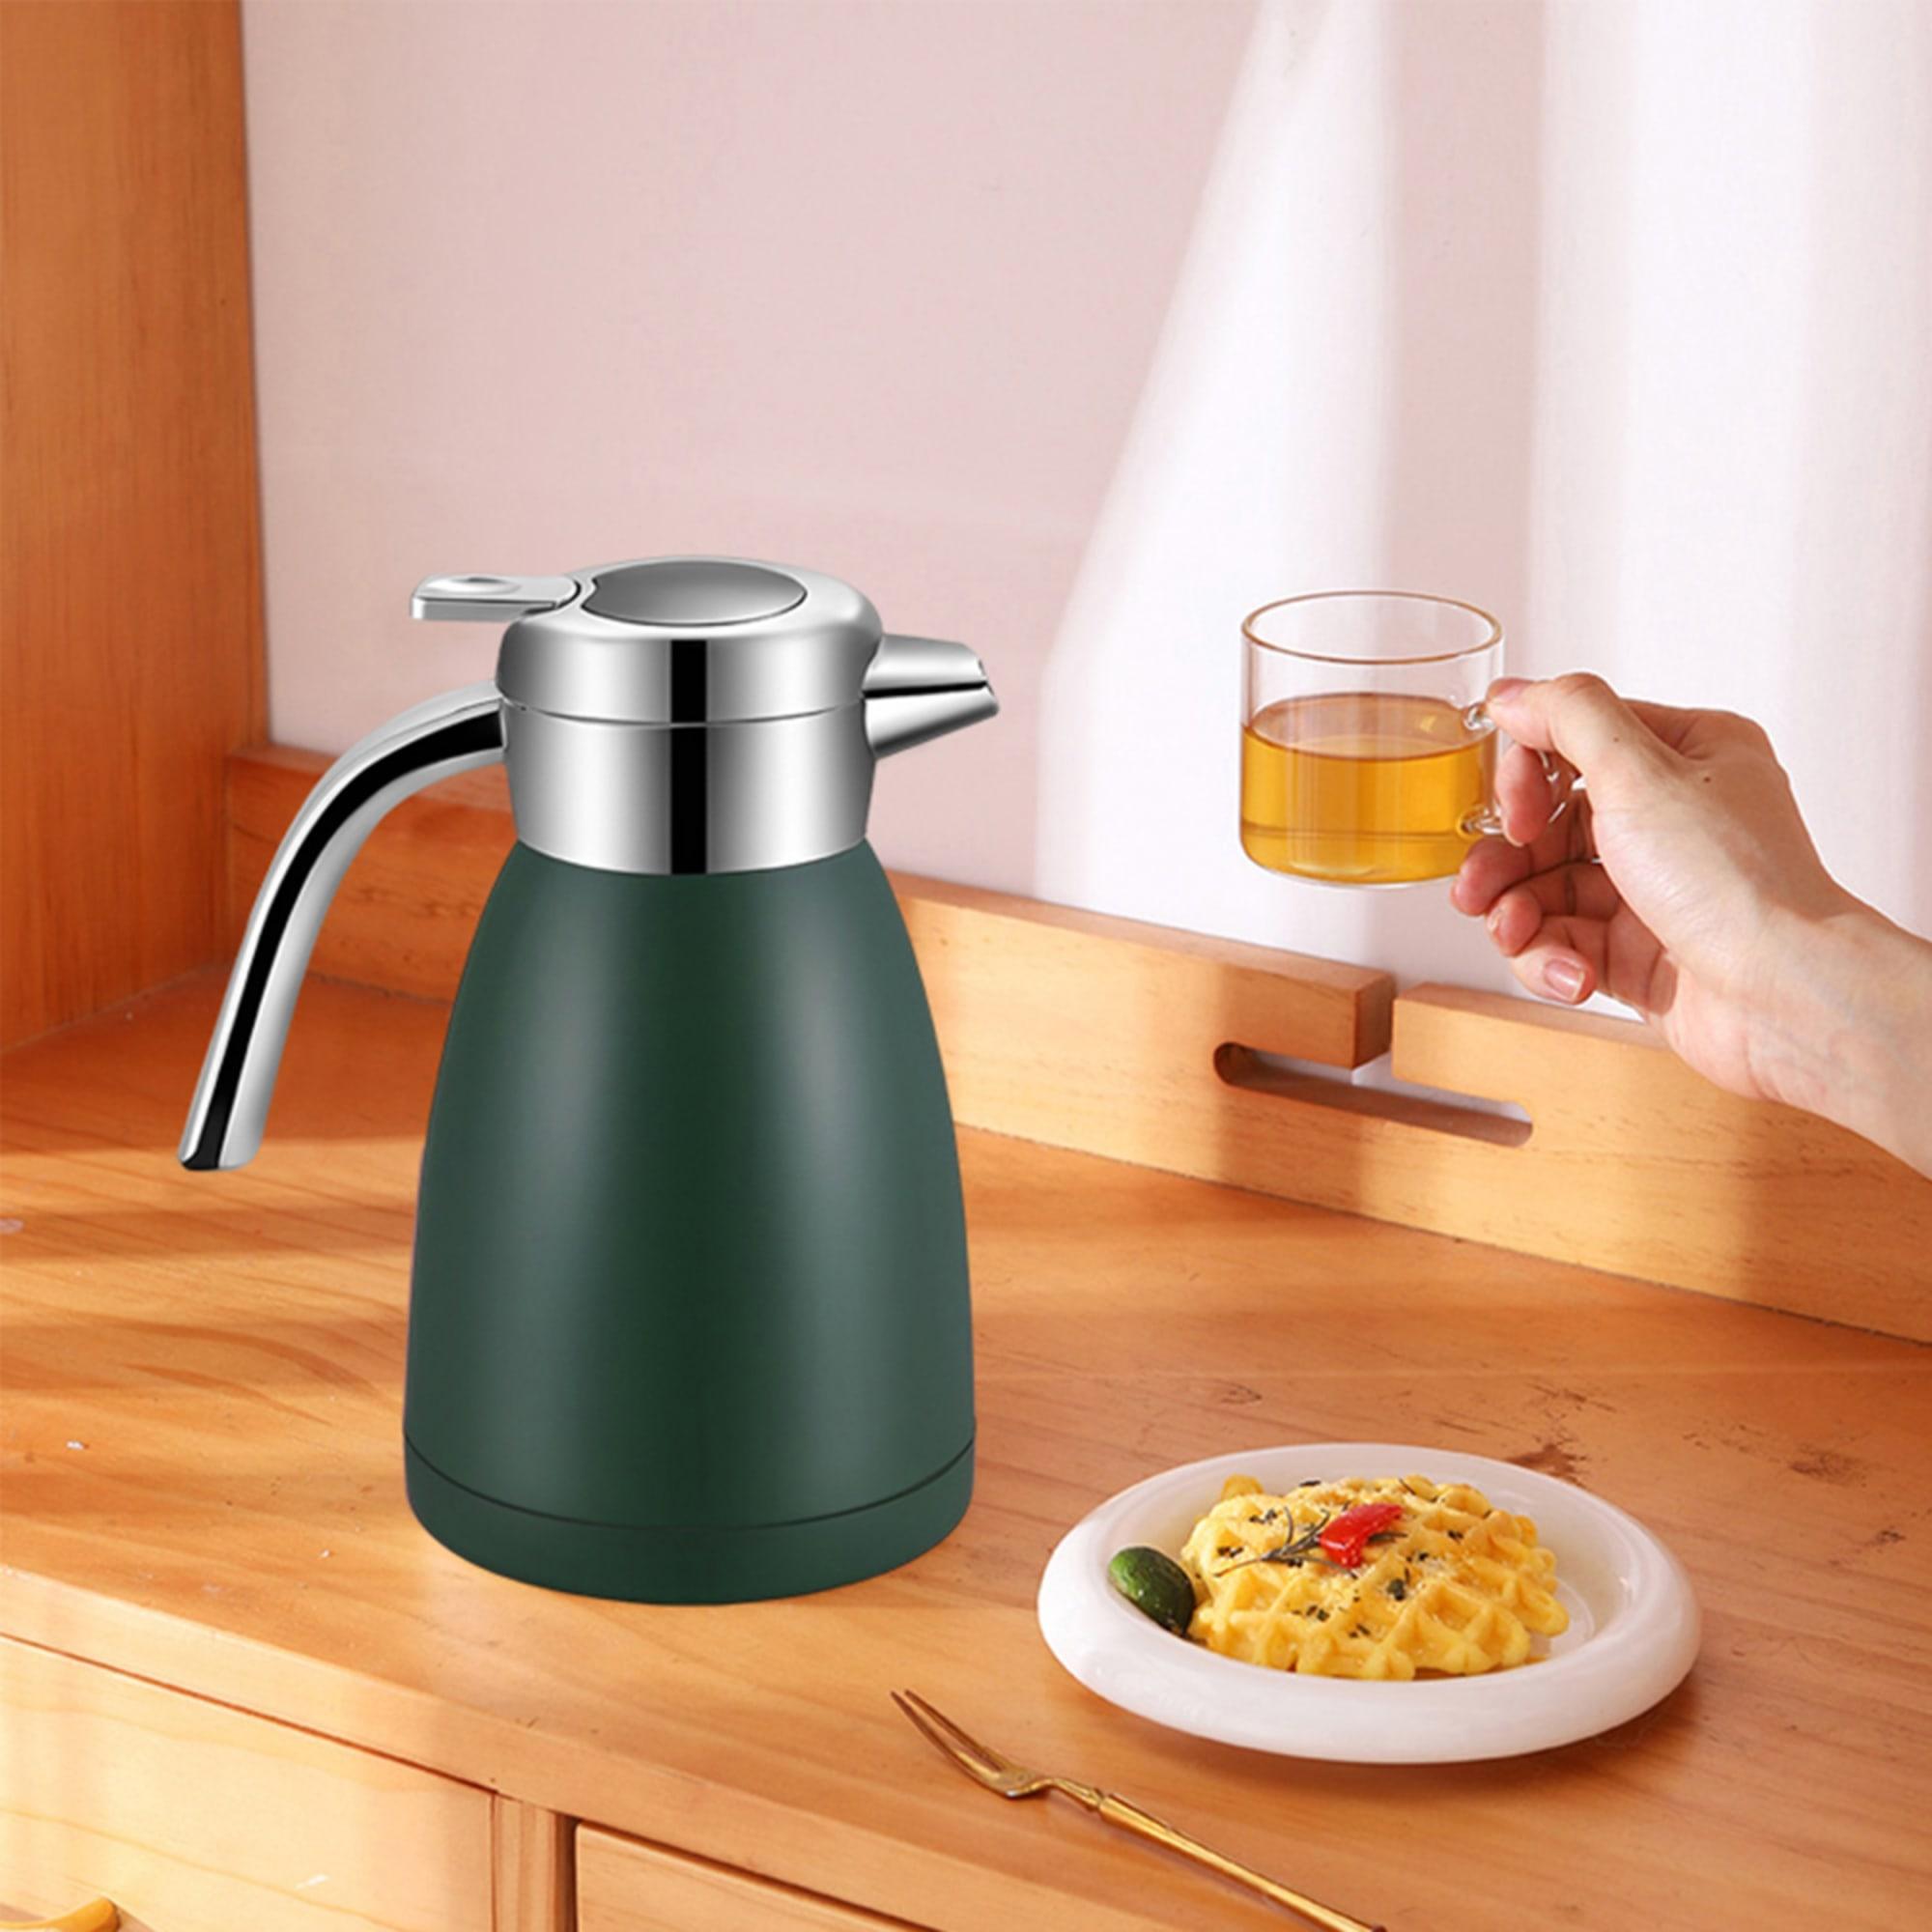 Soga Stainless Steel Insulated Kettle 1.2L Green Image 2